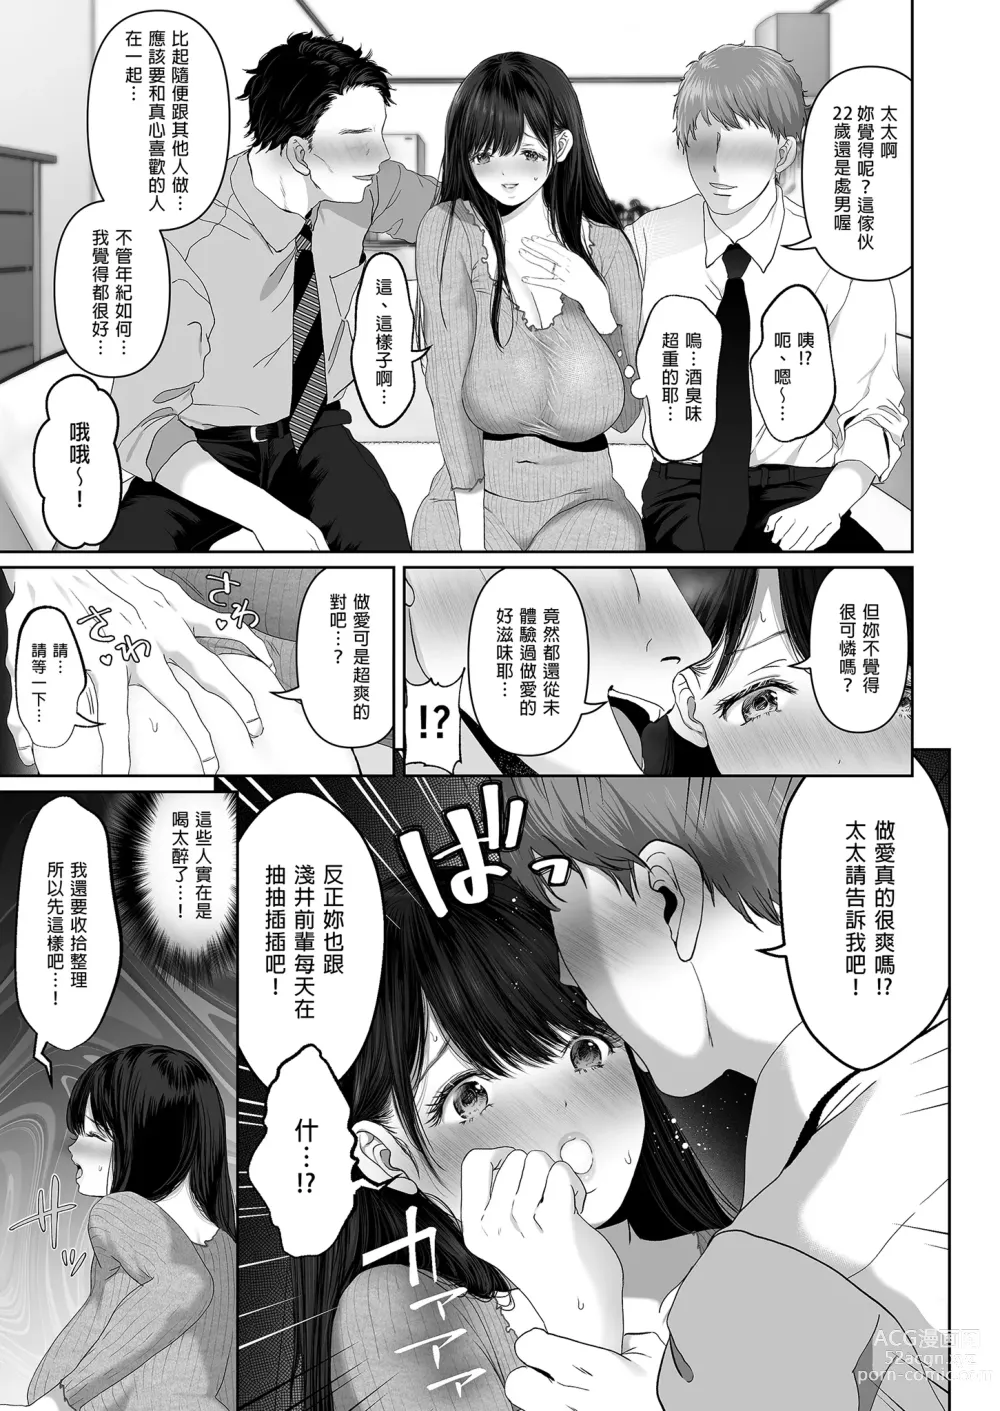 Page 5 of manga Wakaba is where you want to be. Summary edition ~Married Woman Pure Love NTR~ (uncensored)